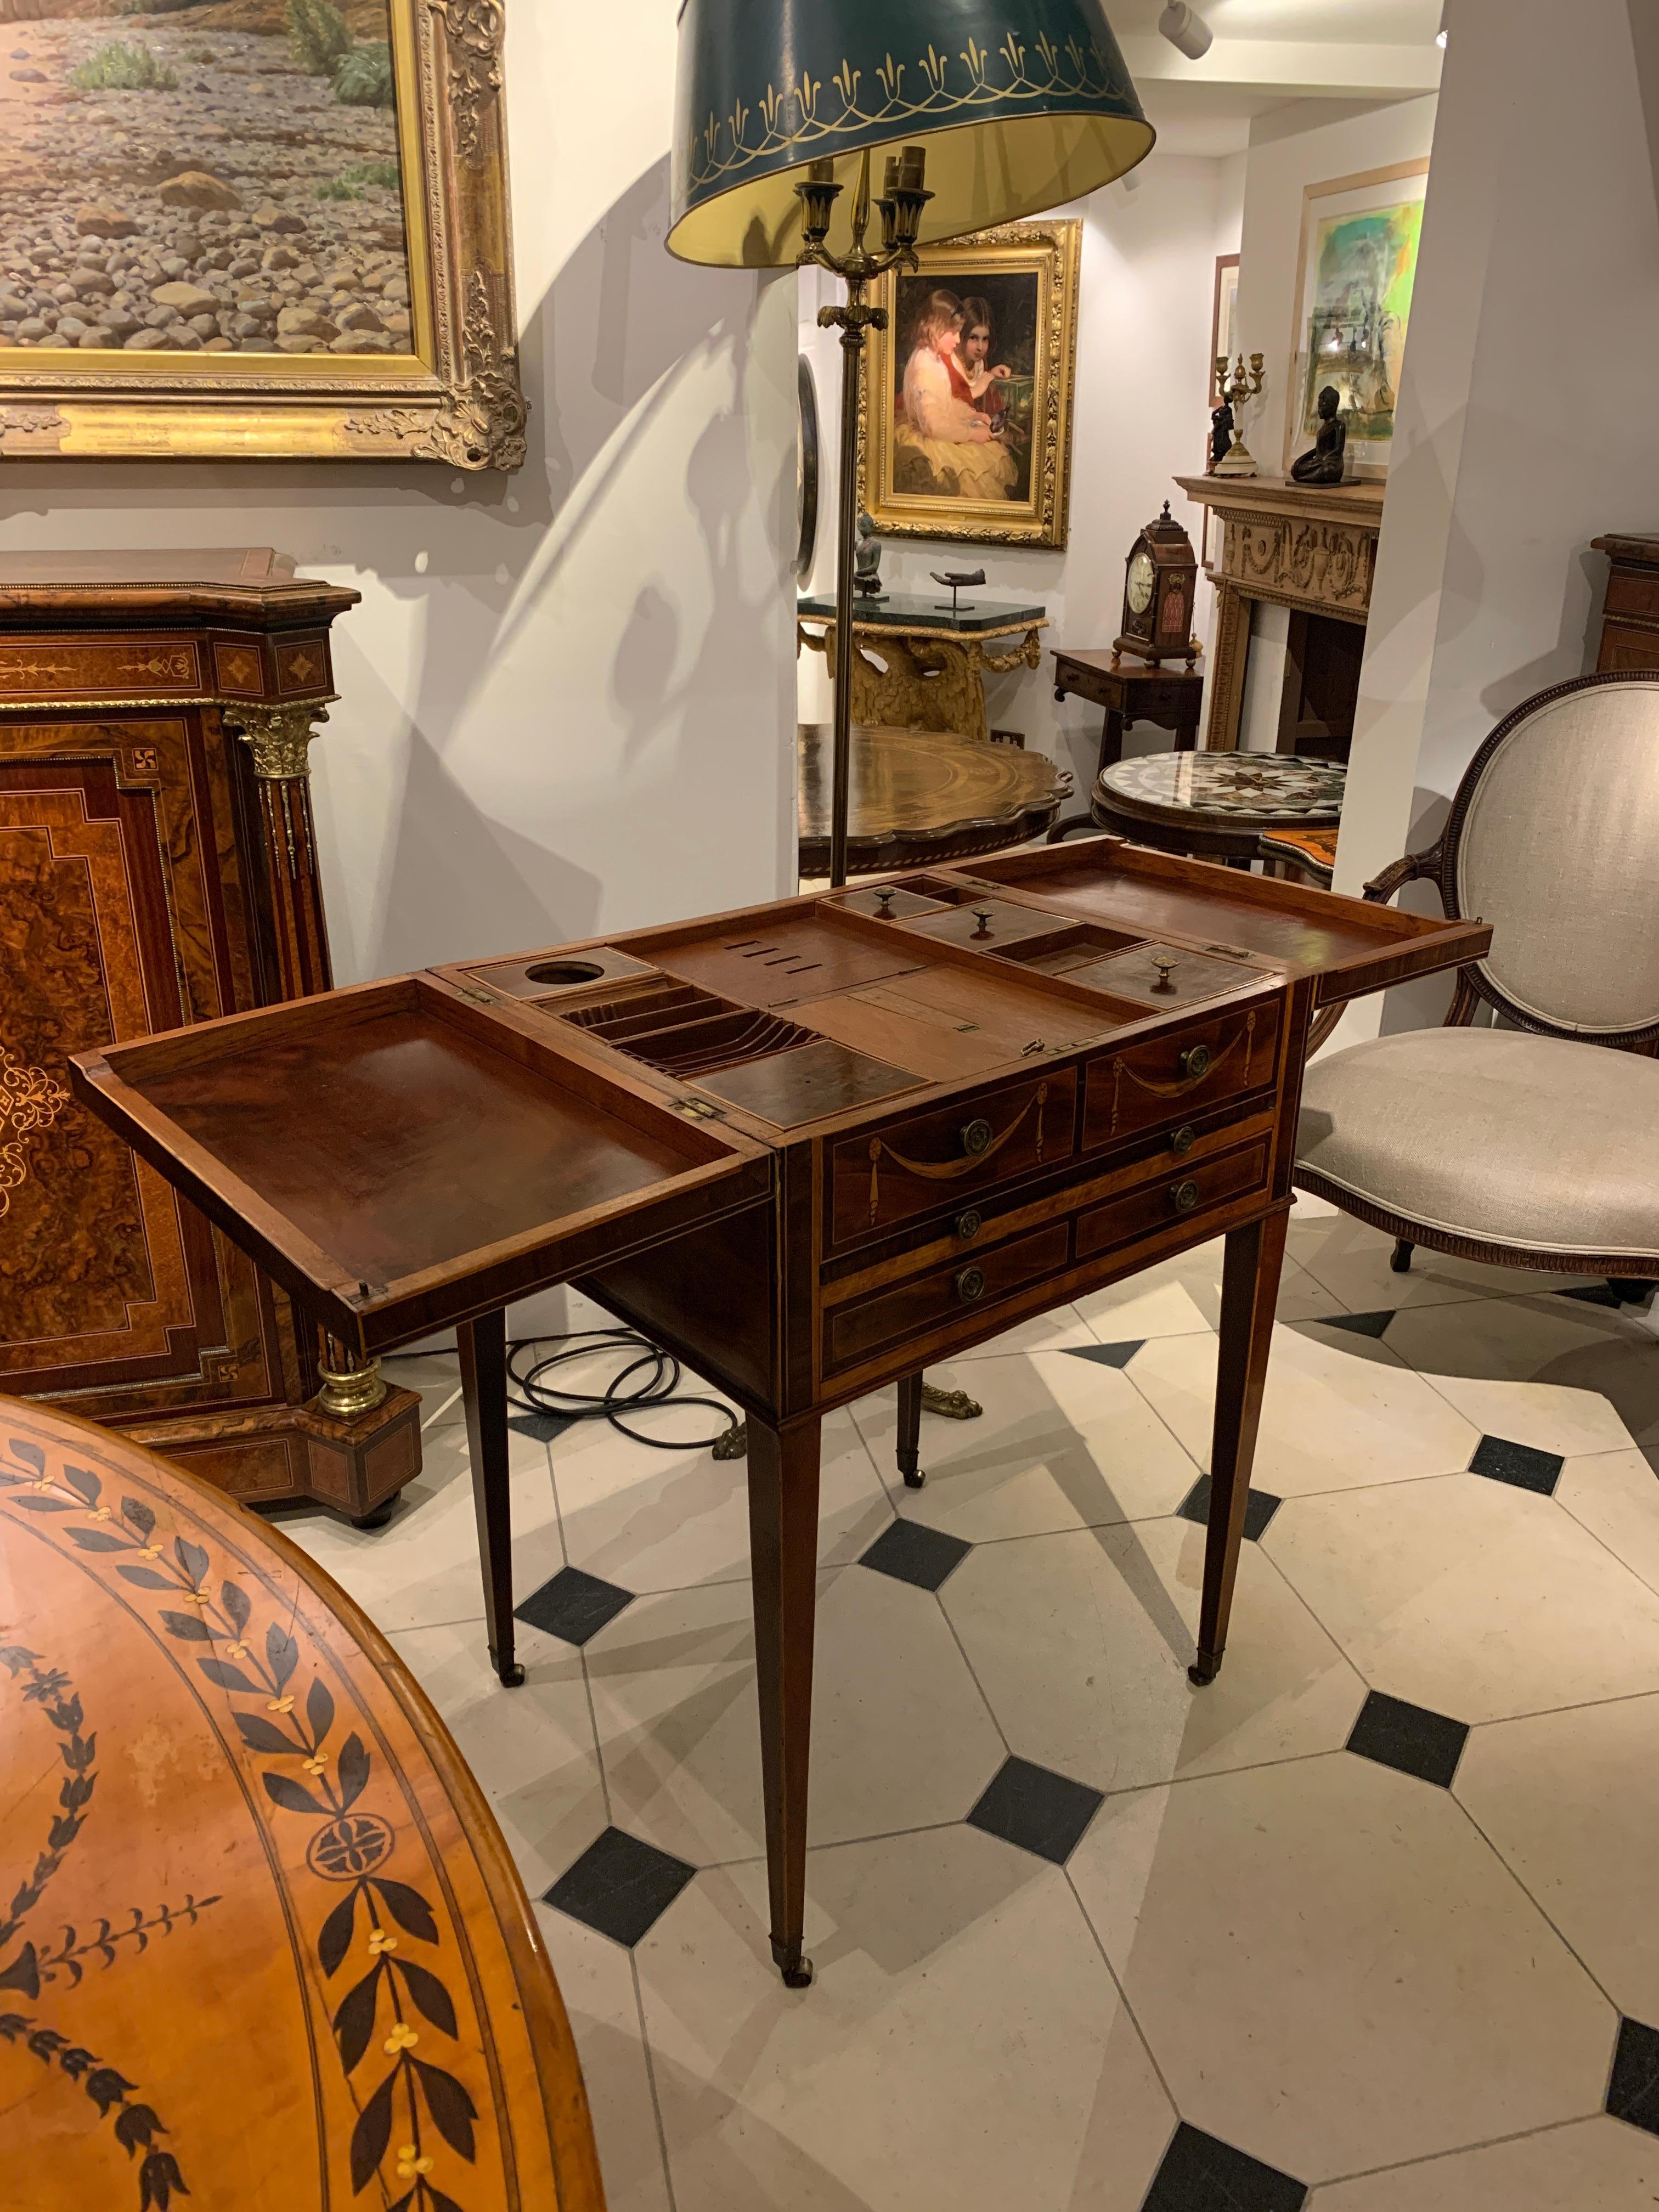 Mayhew and Ince style dressing table, on brass wheels. 
Mahogany, satinwood, tulip and box woods, beautiful inlay and details. Inside Burr Yewwood, with mirror.

Late 18th century.